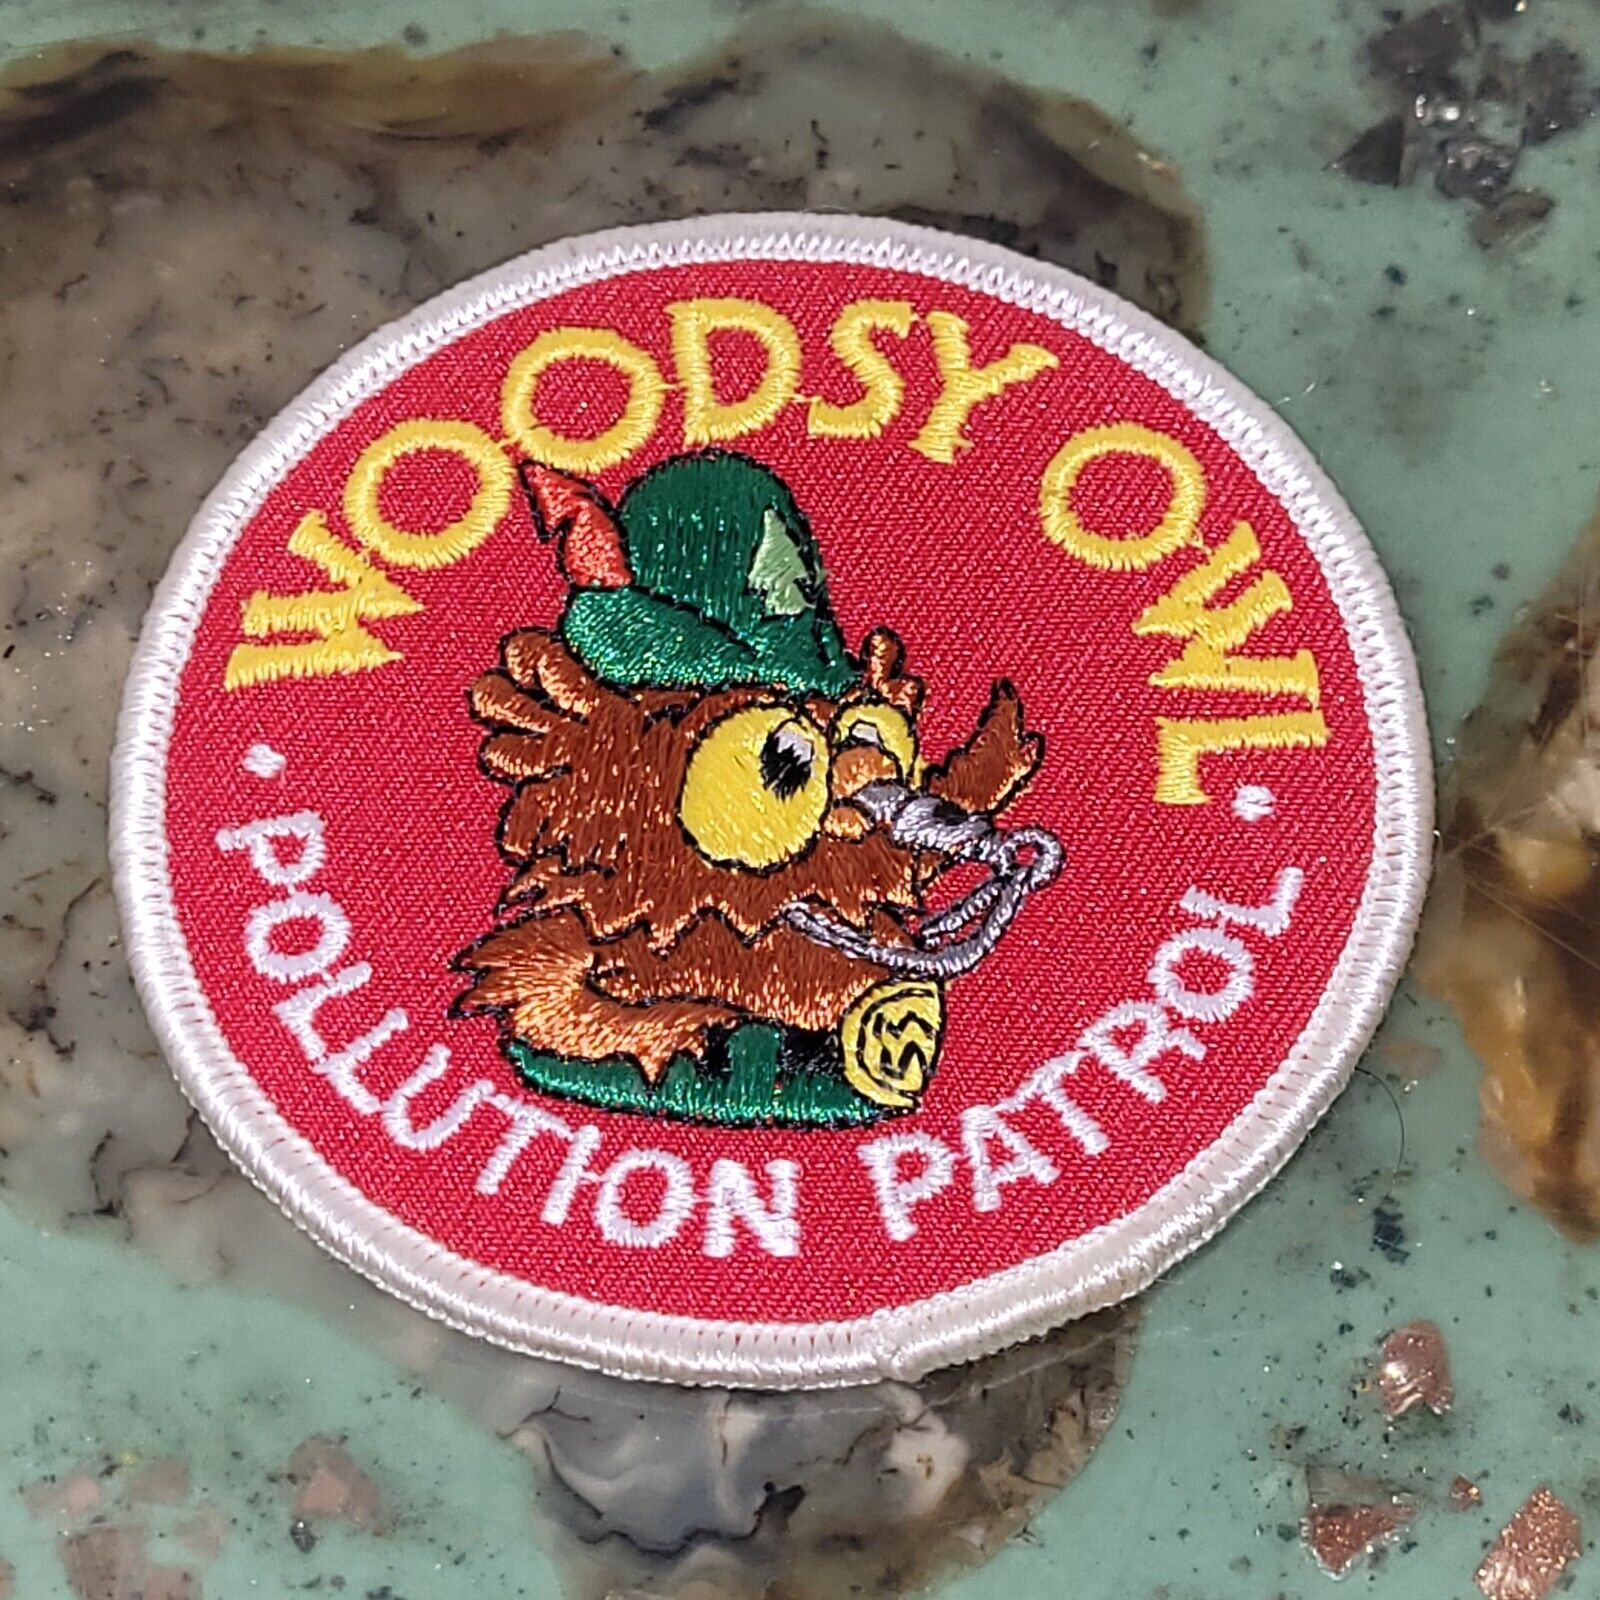 NOS Vintage 70s WOODSY OWL POLLUTION PATROL Embroidered Patch US Forest Service